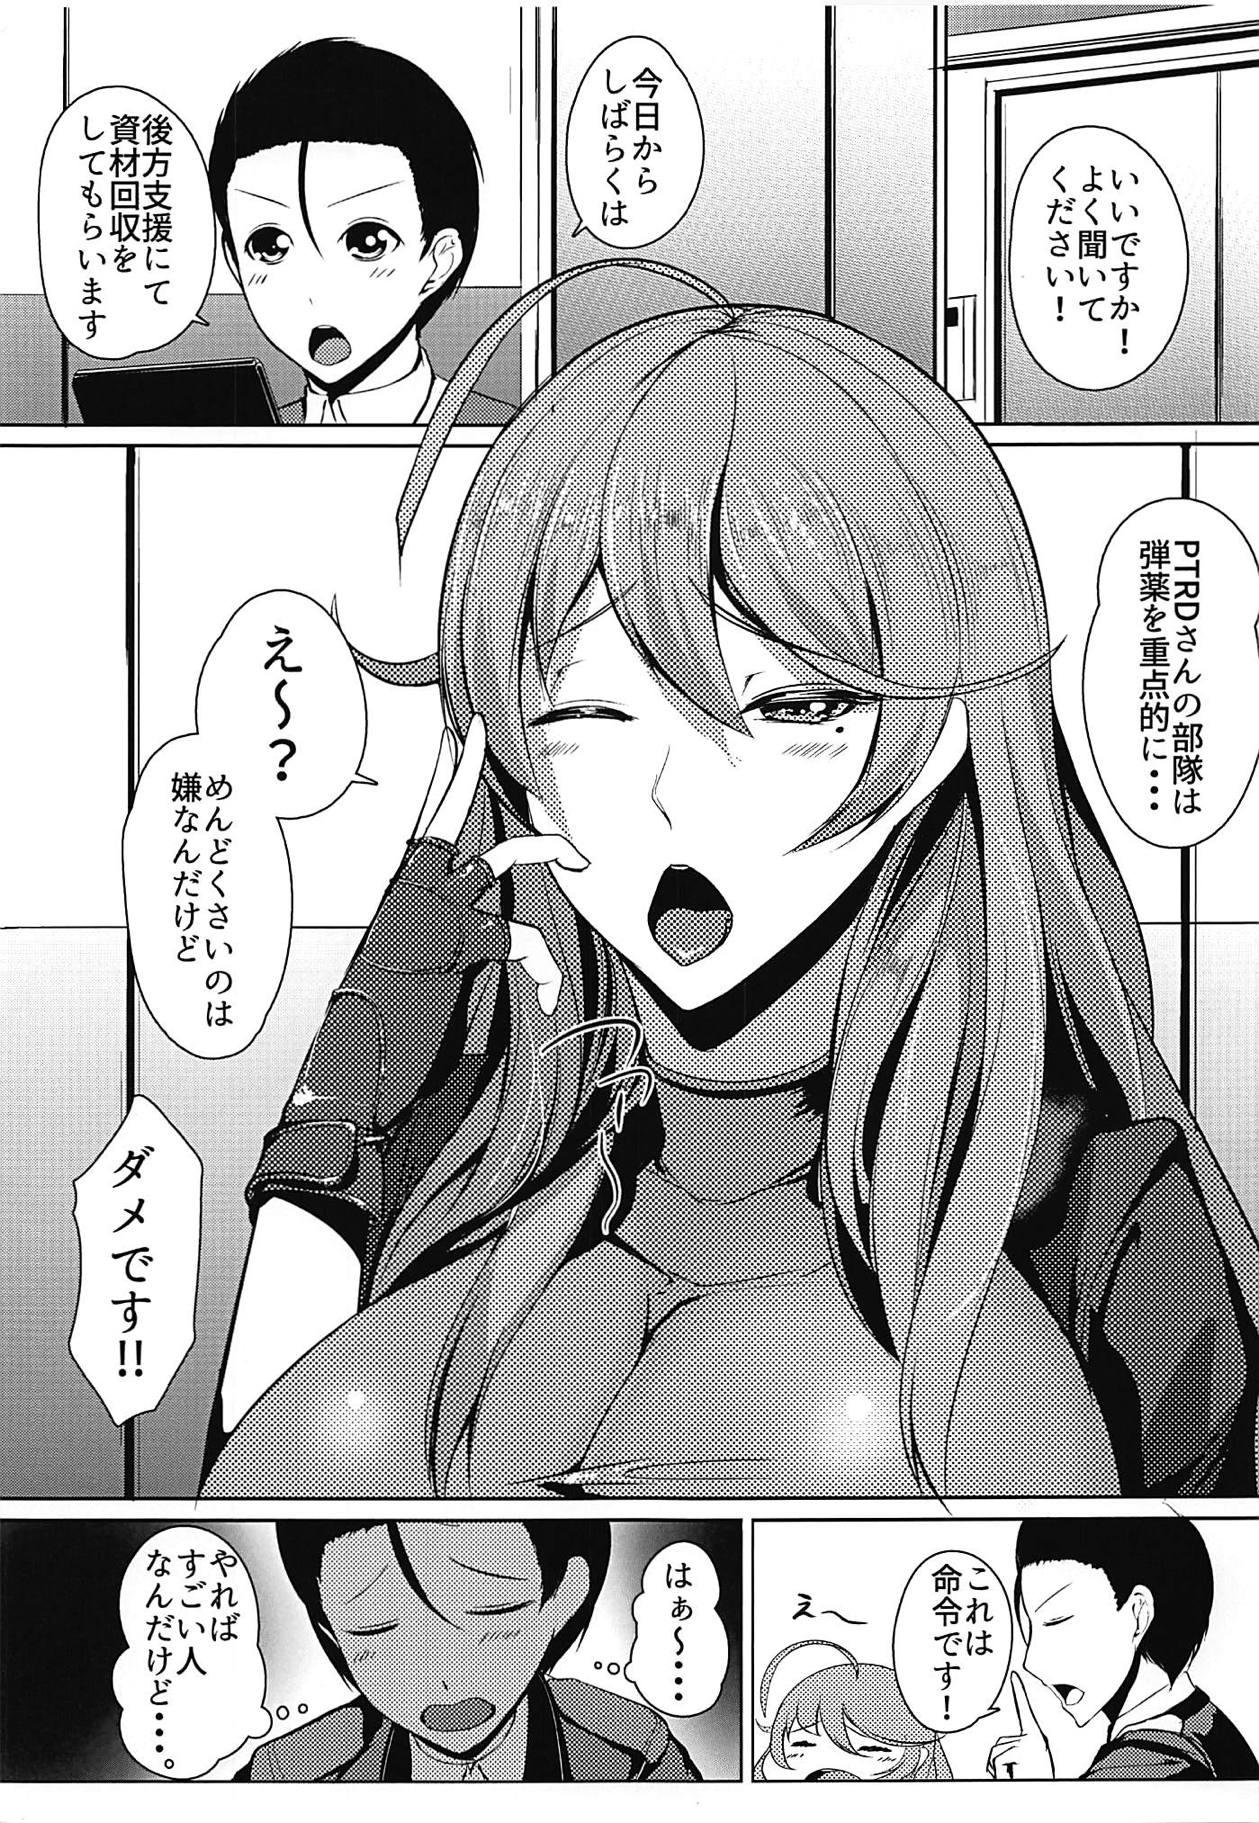 Action LADYS BACKYARD LINE - Girls frontline Sapphic Erotica - Page 2